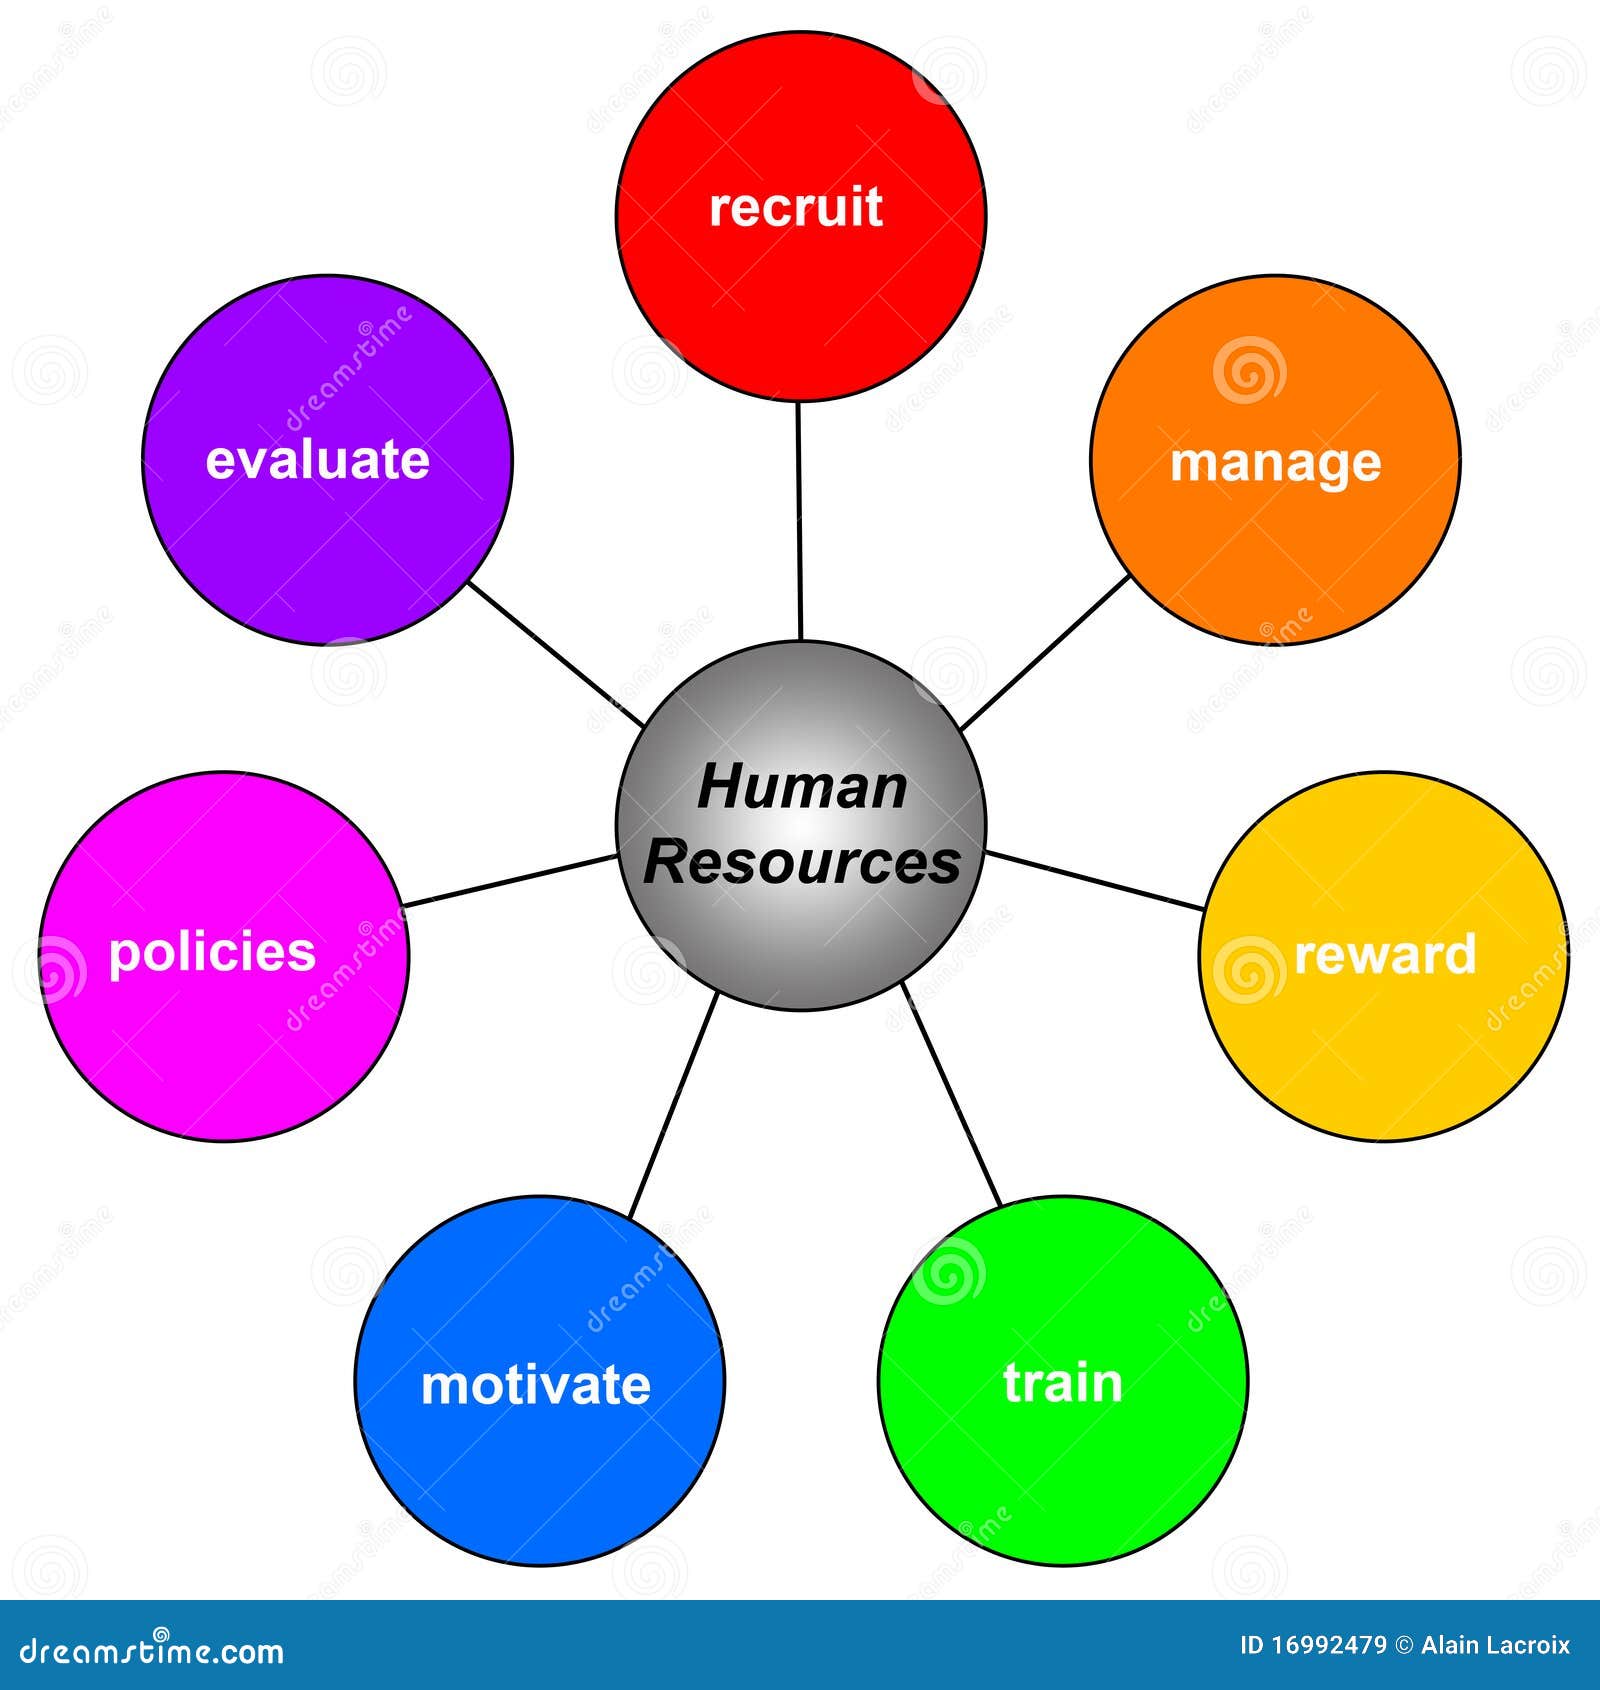 human relations clipart - photo #23